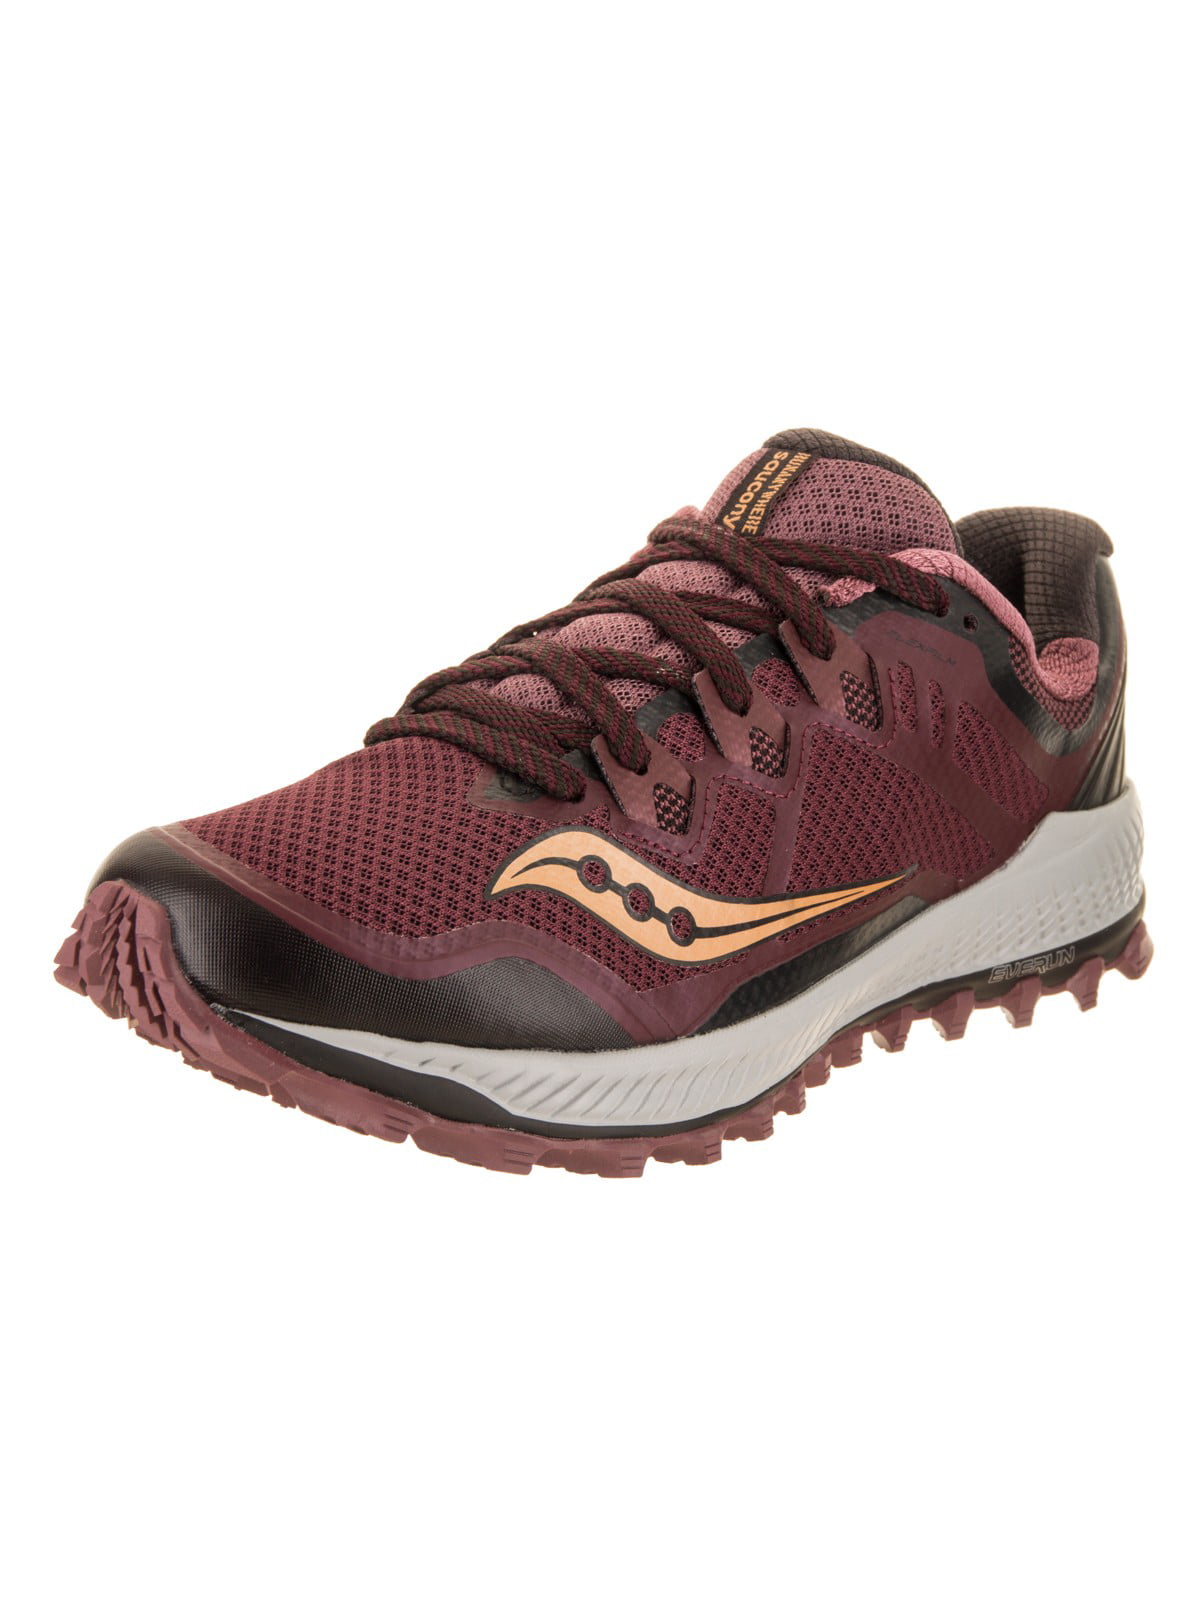 saucony hiking shoes womens